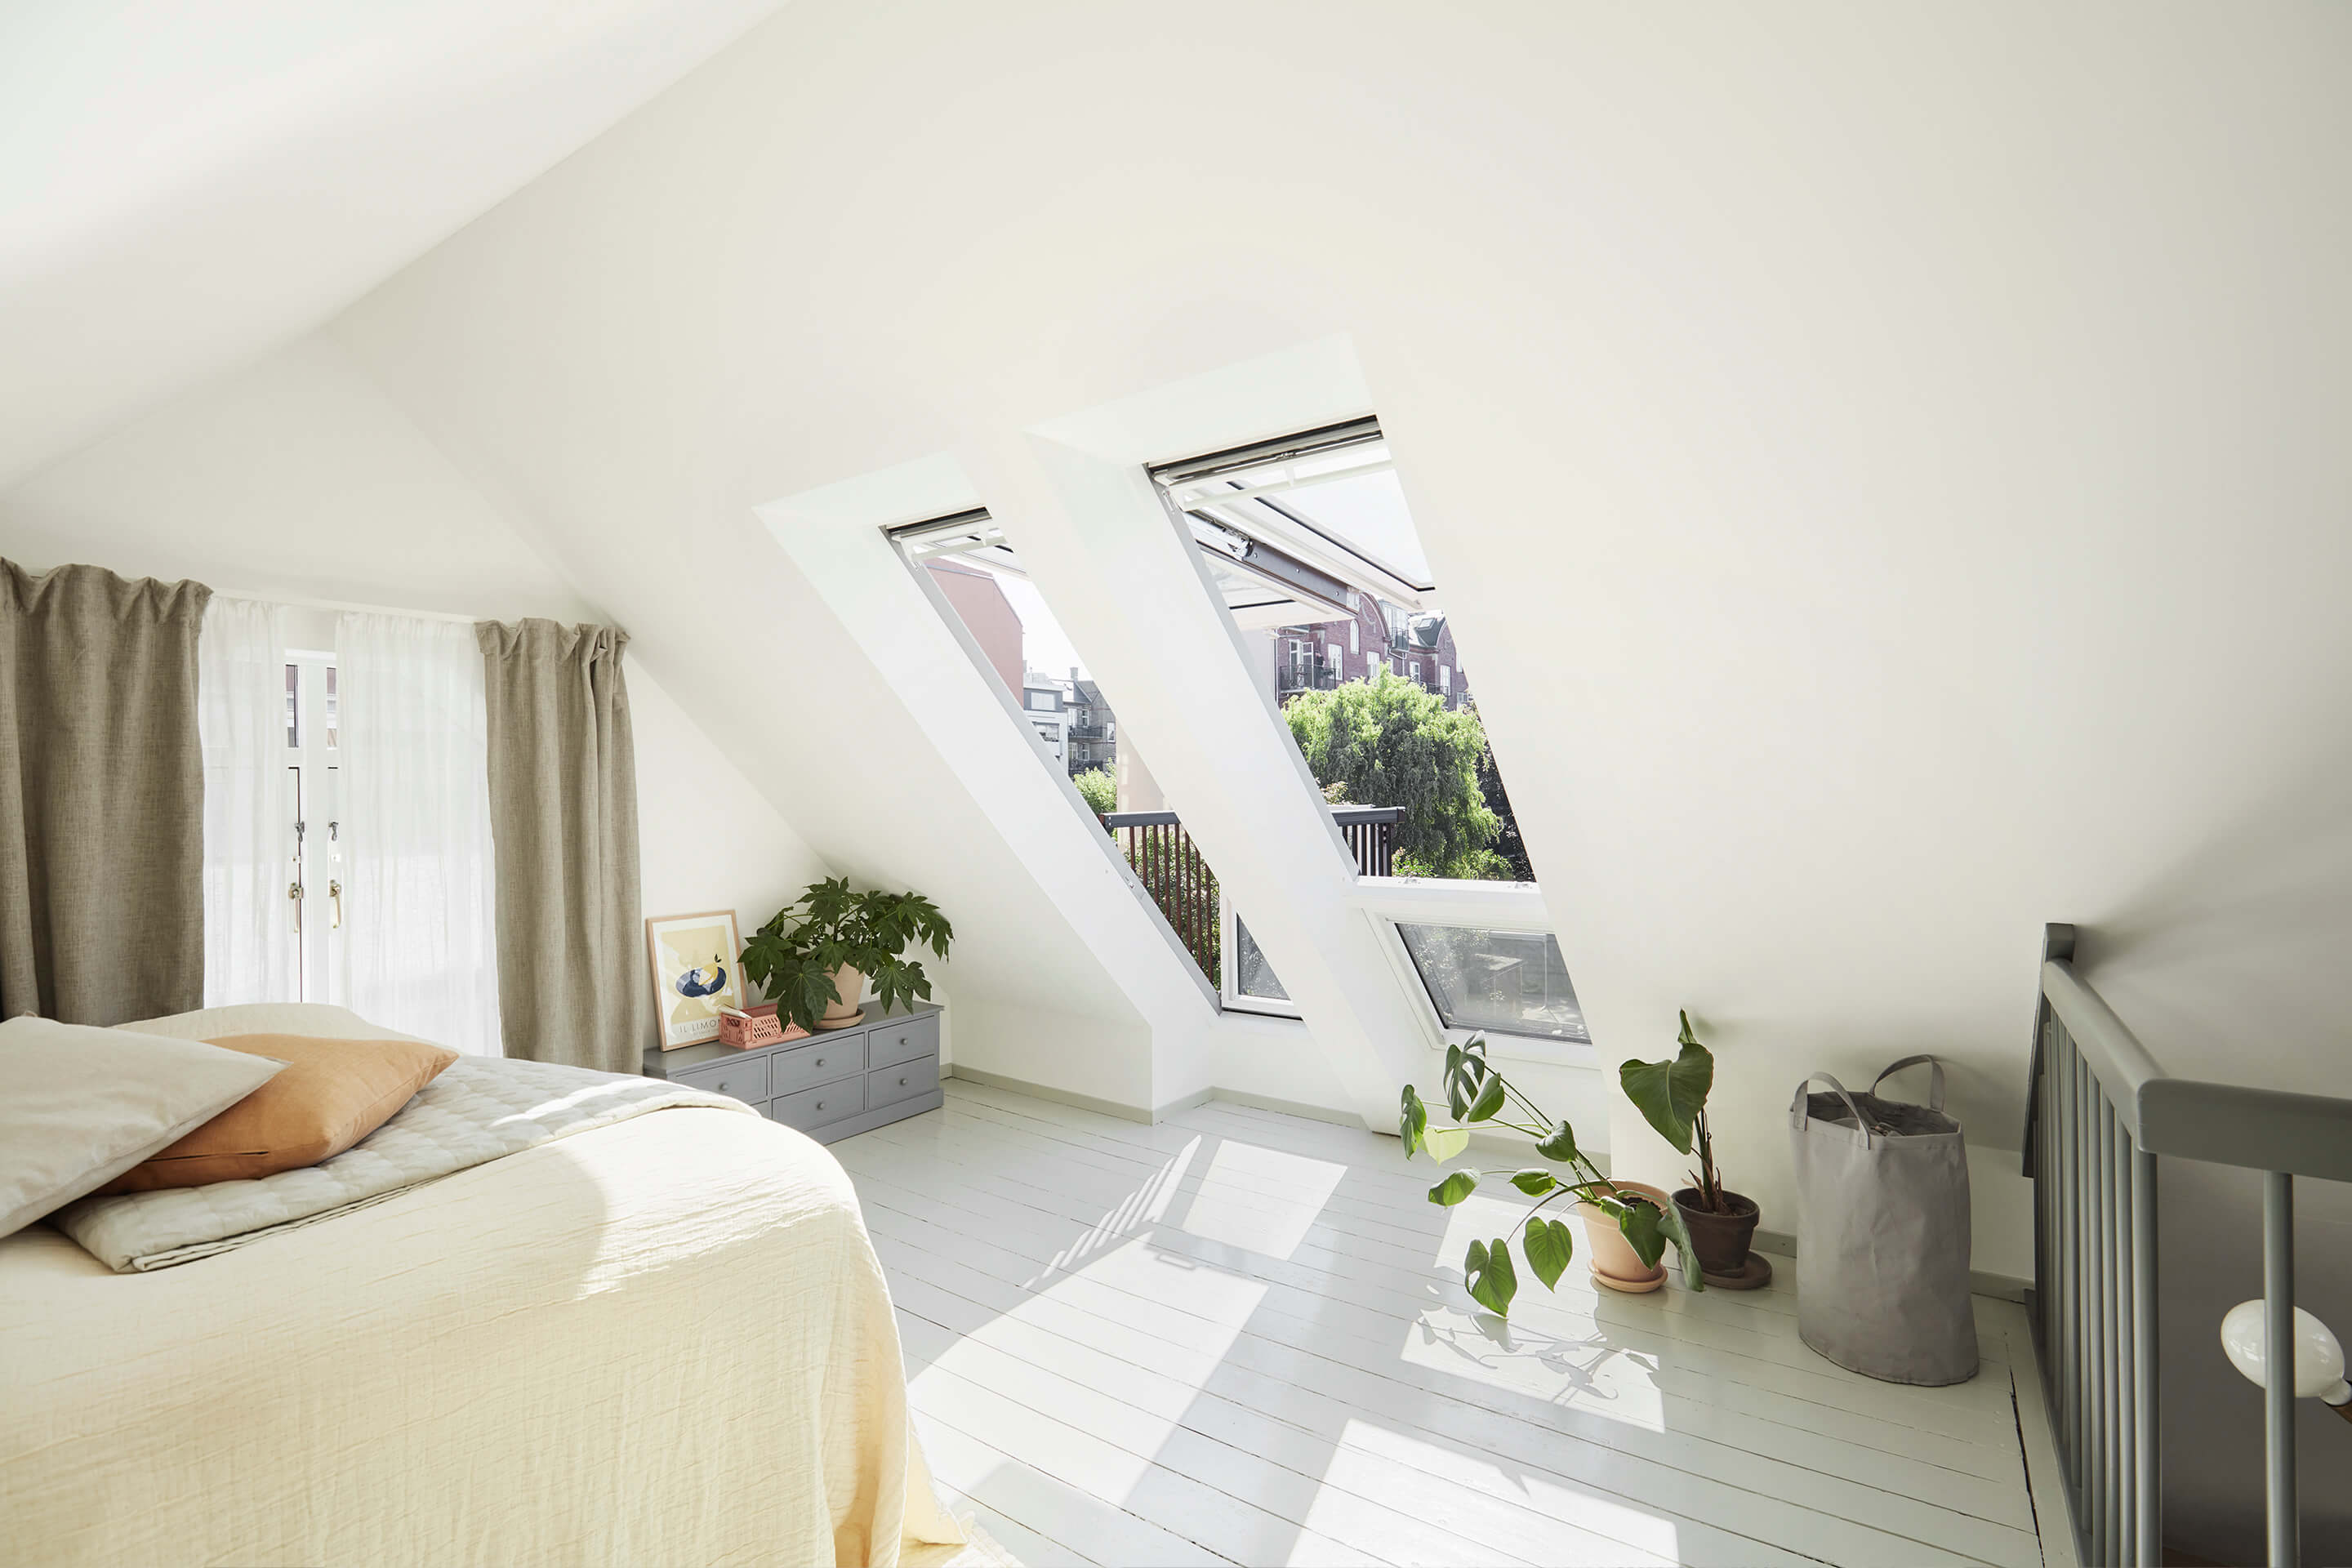 A bright bedroom with open roof windows.